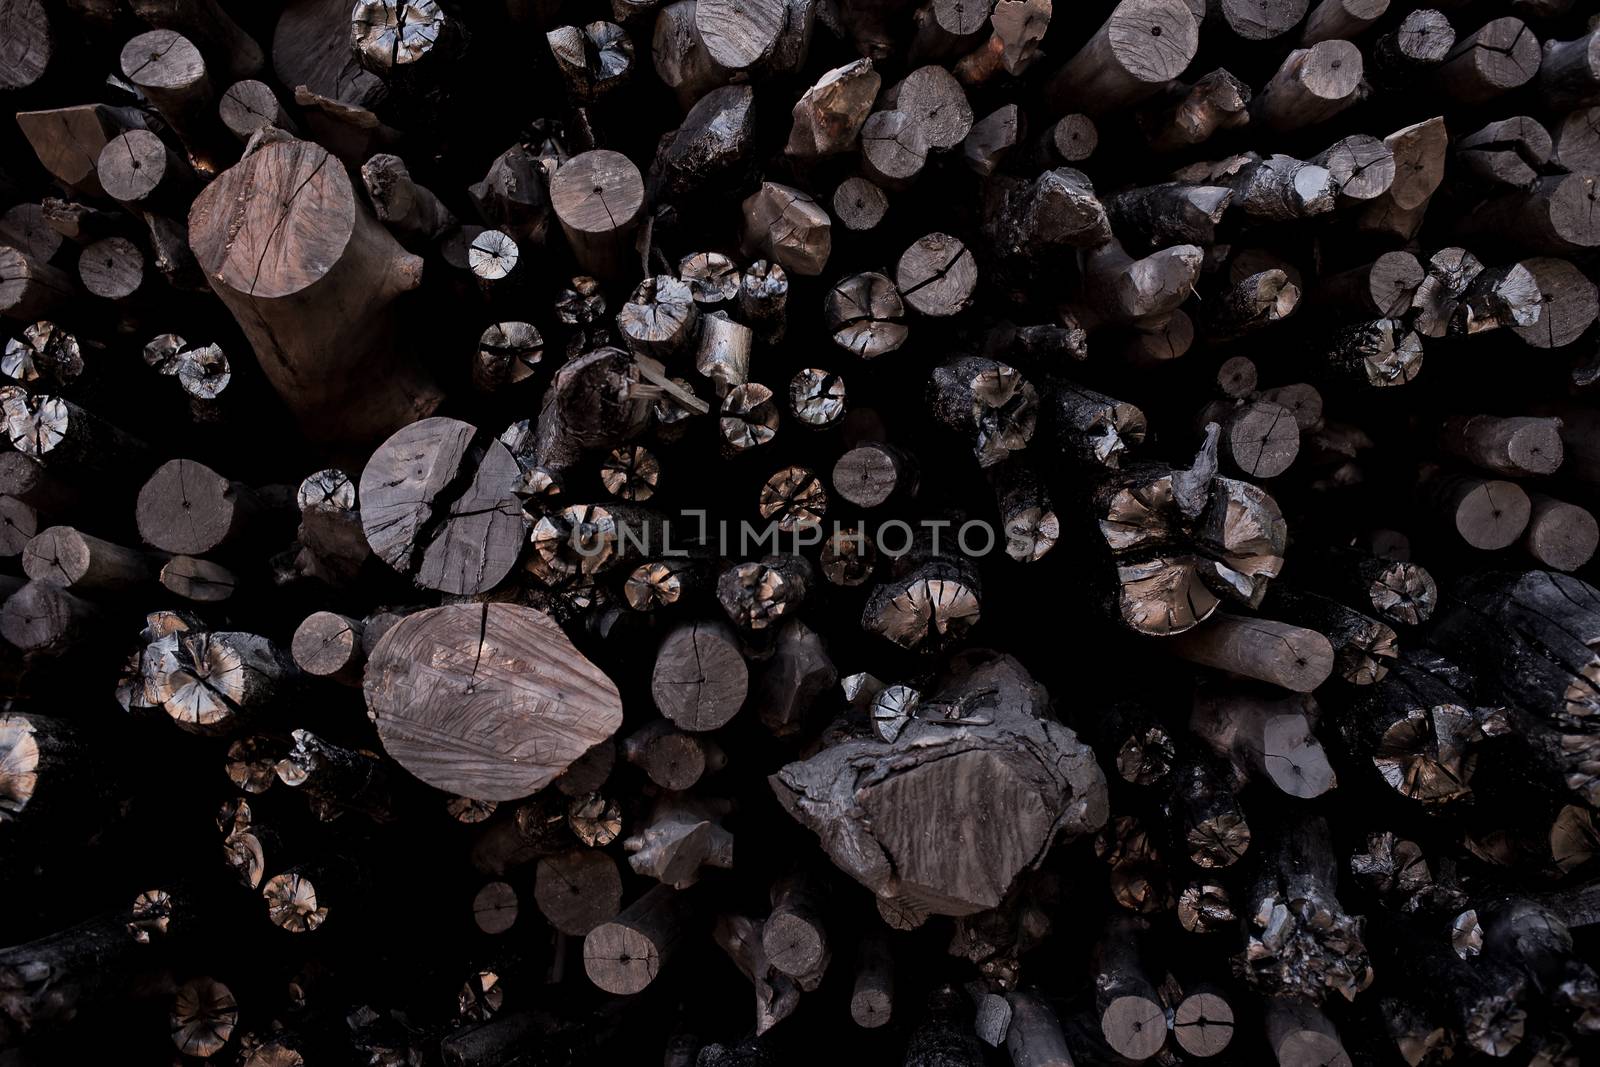 Natural wood charcoal, traditional charcoal or hard wood charcoa by kaiskynet